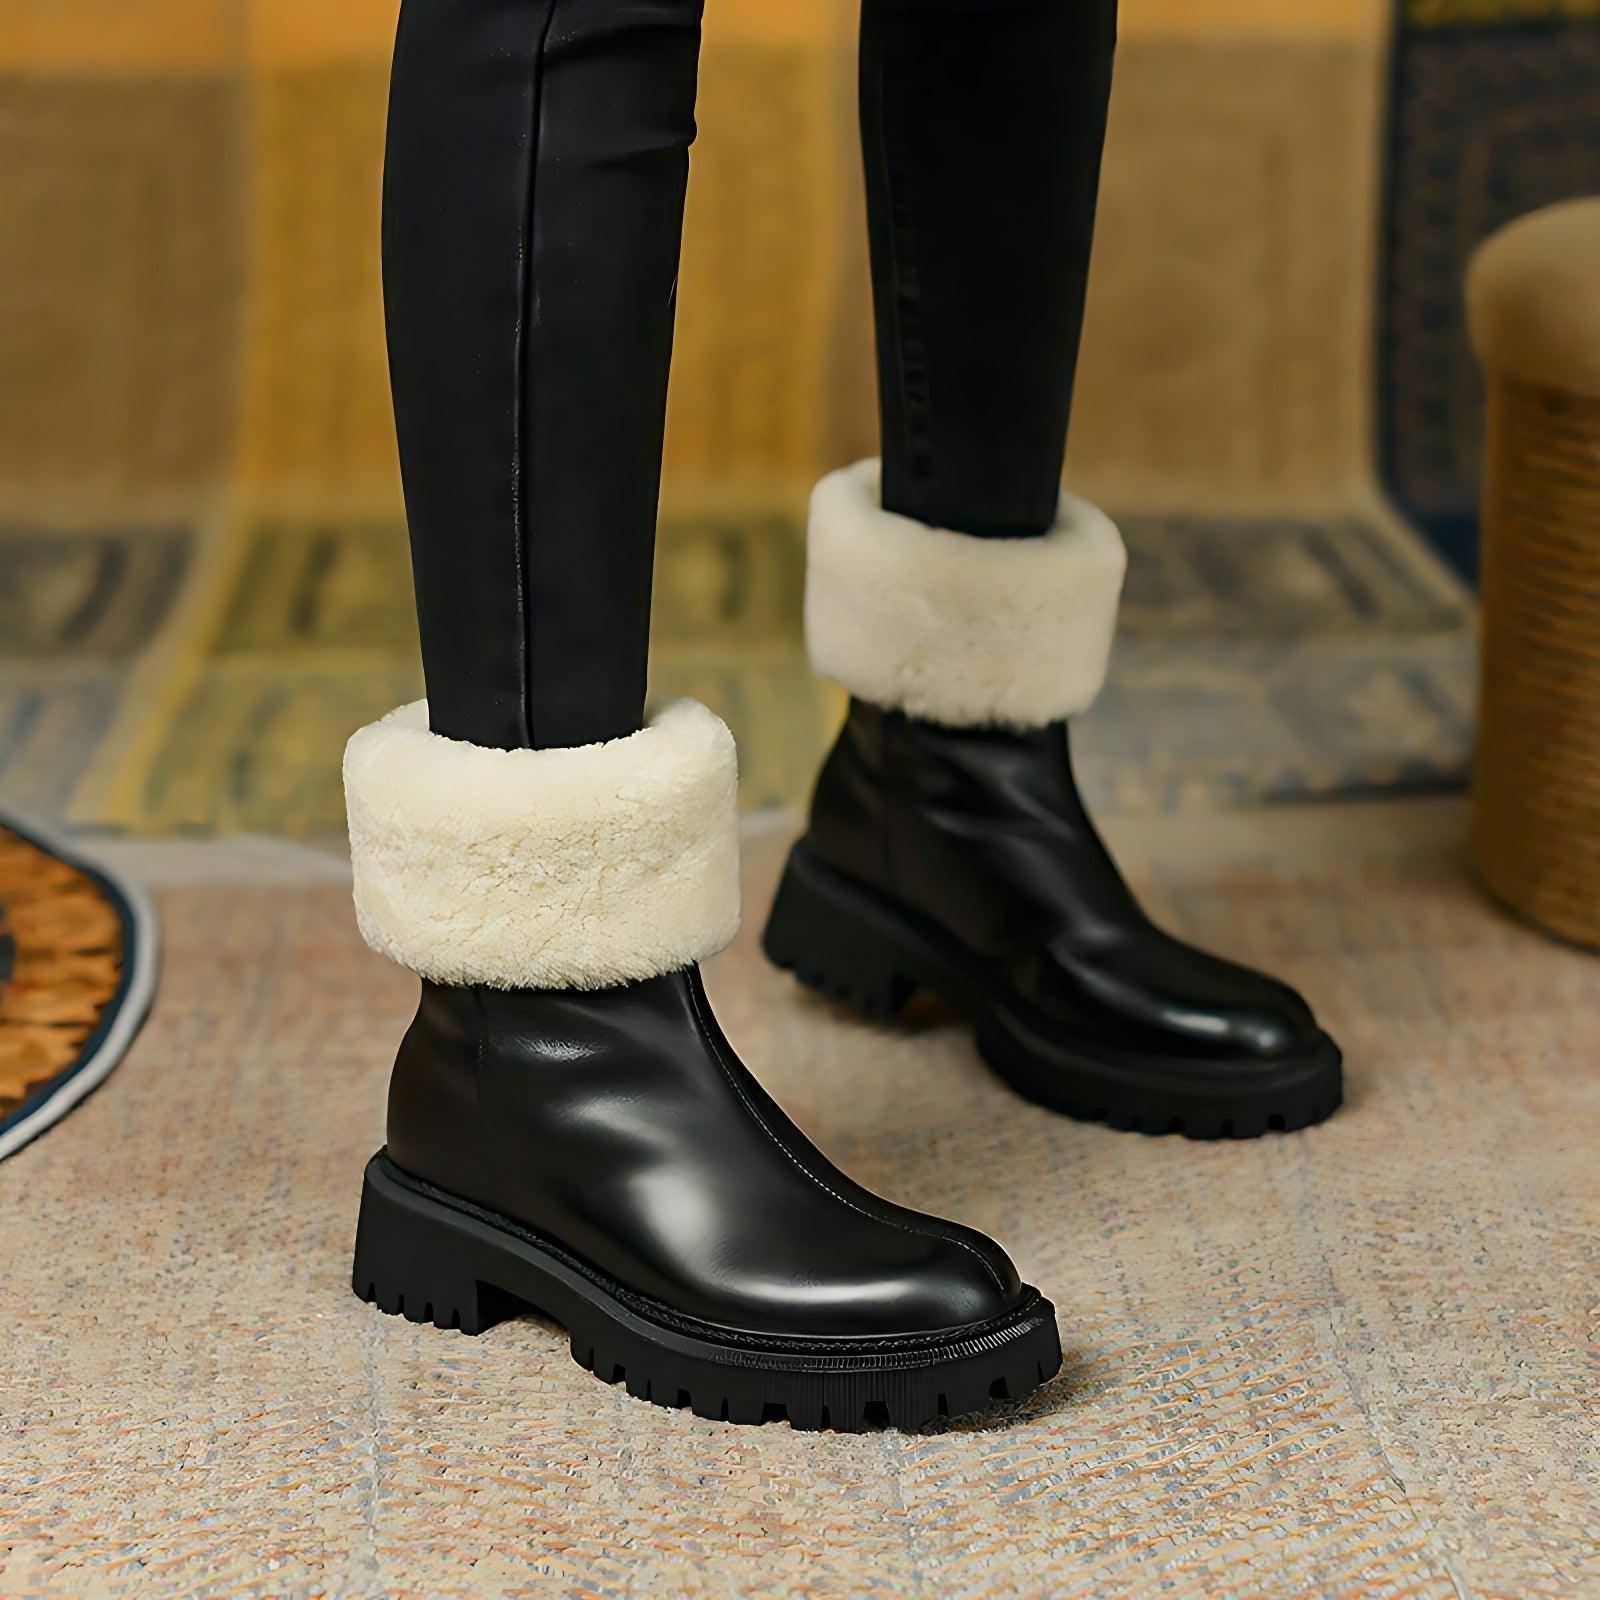 Women's Black Ankle Boots - Touchy Style .